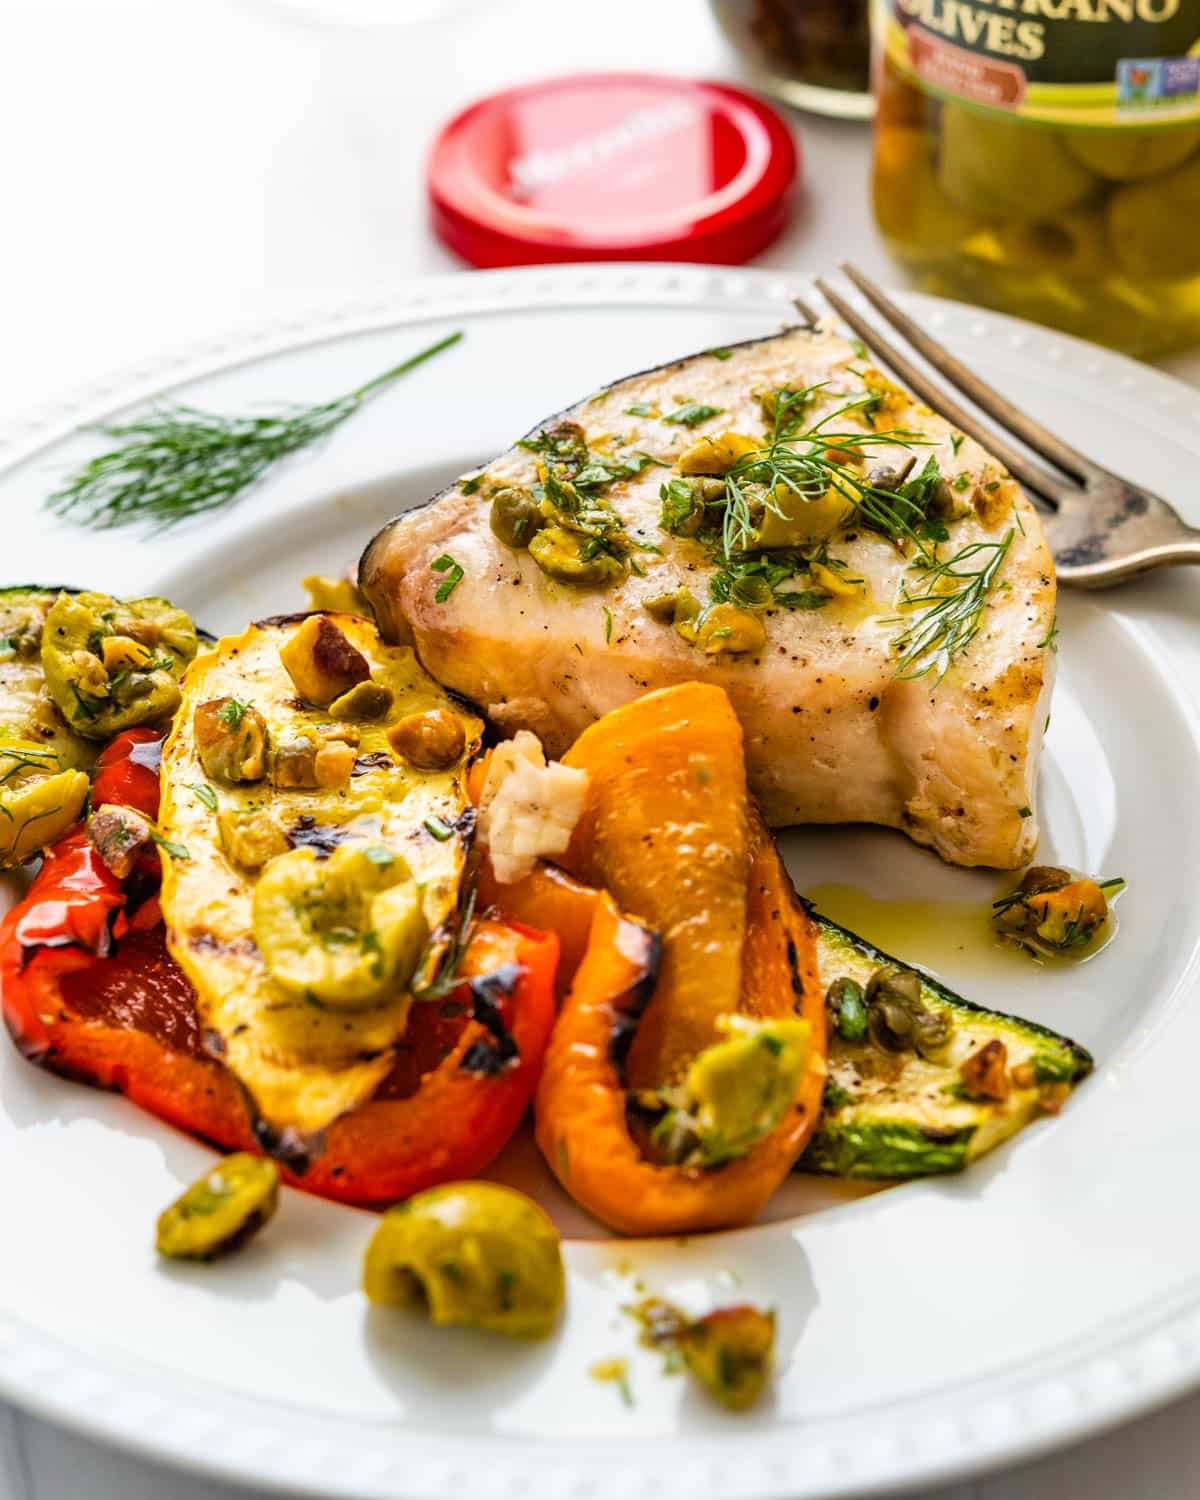 A plate of grilled swordfish and vegetables with olive pistachio relish.